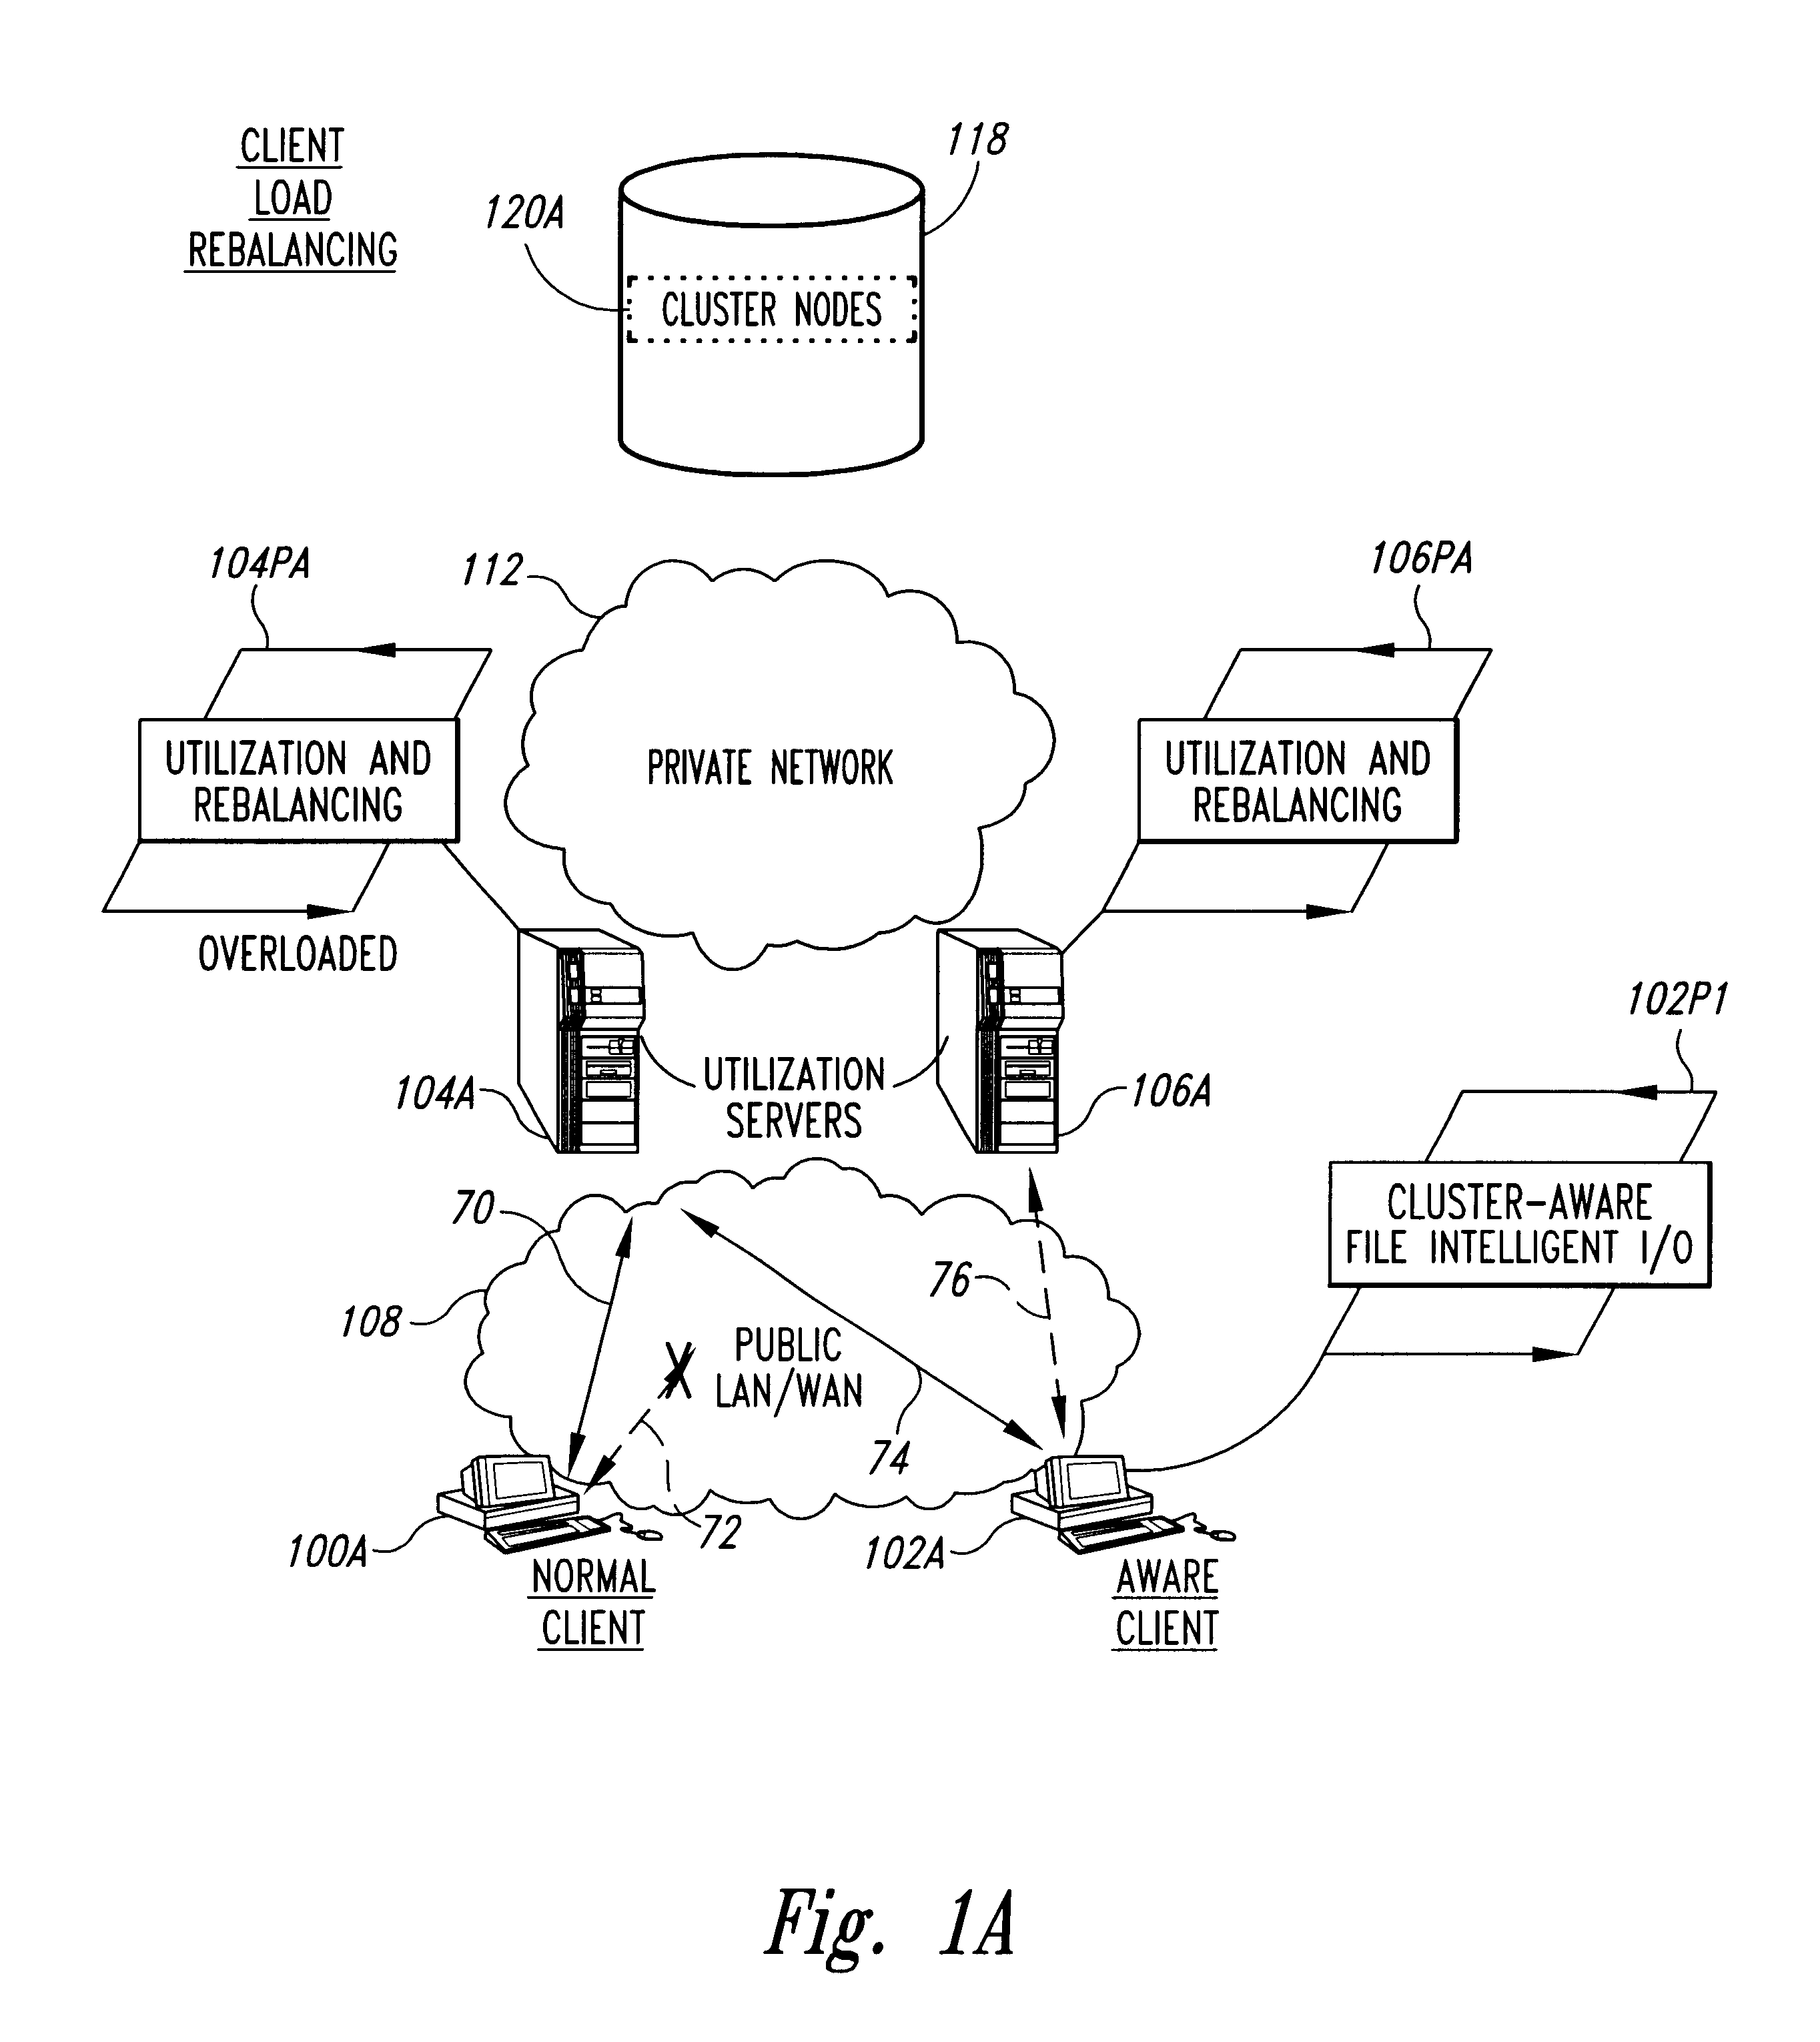 Dynamic load balancing of a network of client and server computer